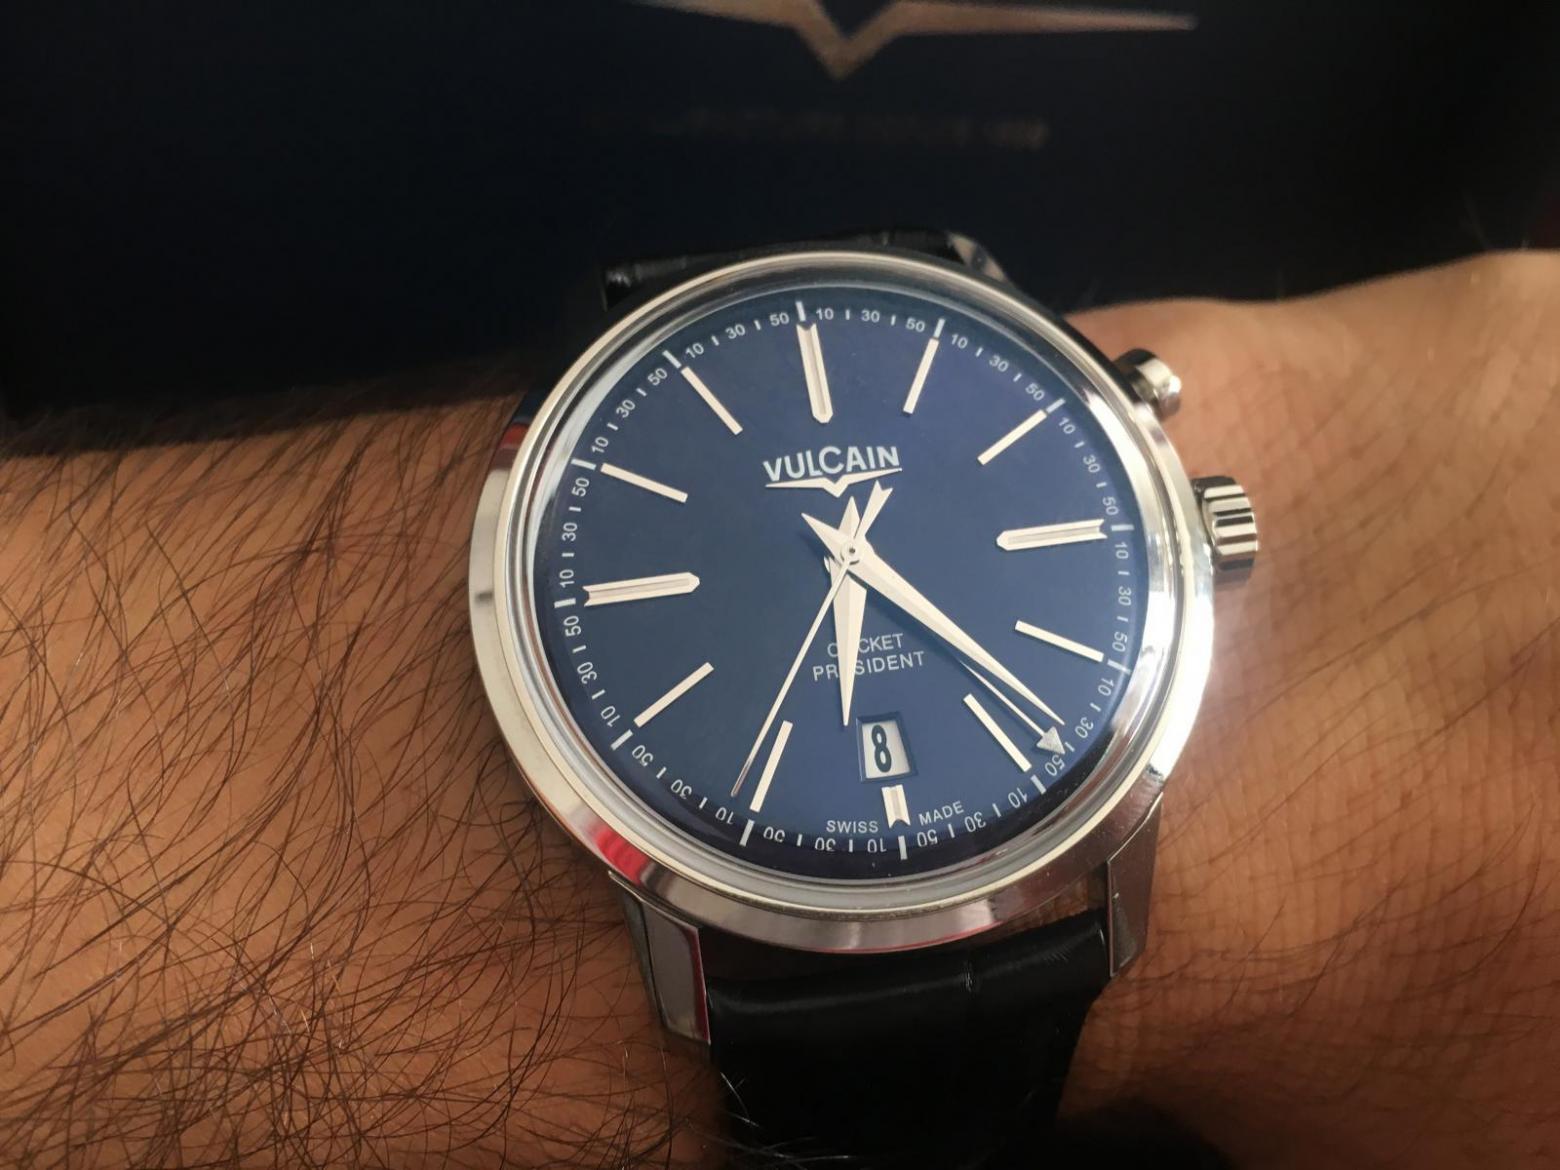 Vulcain Cricket: A Review of the Iconic President’s Watch